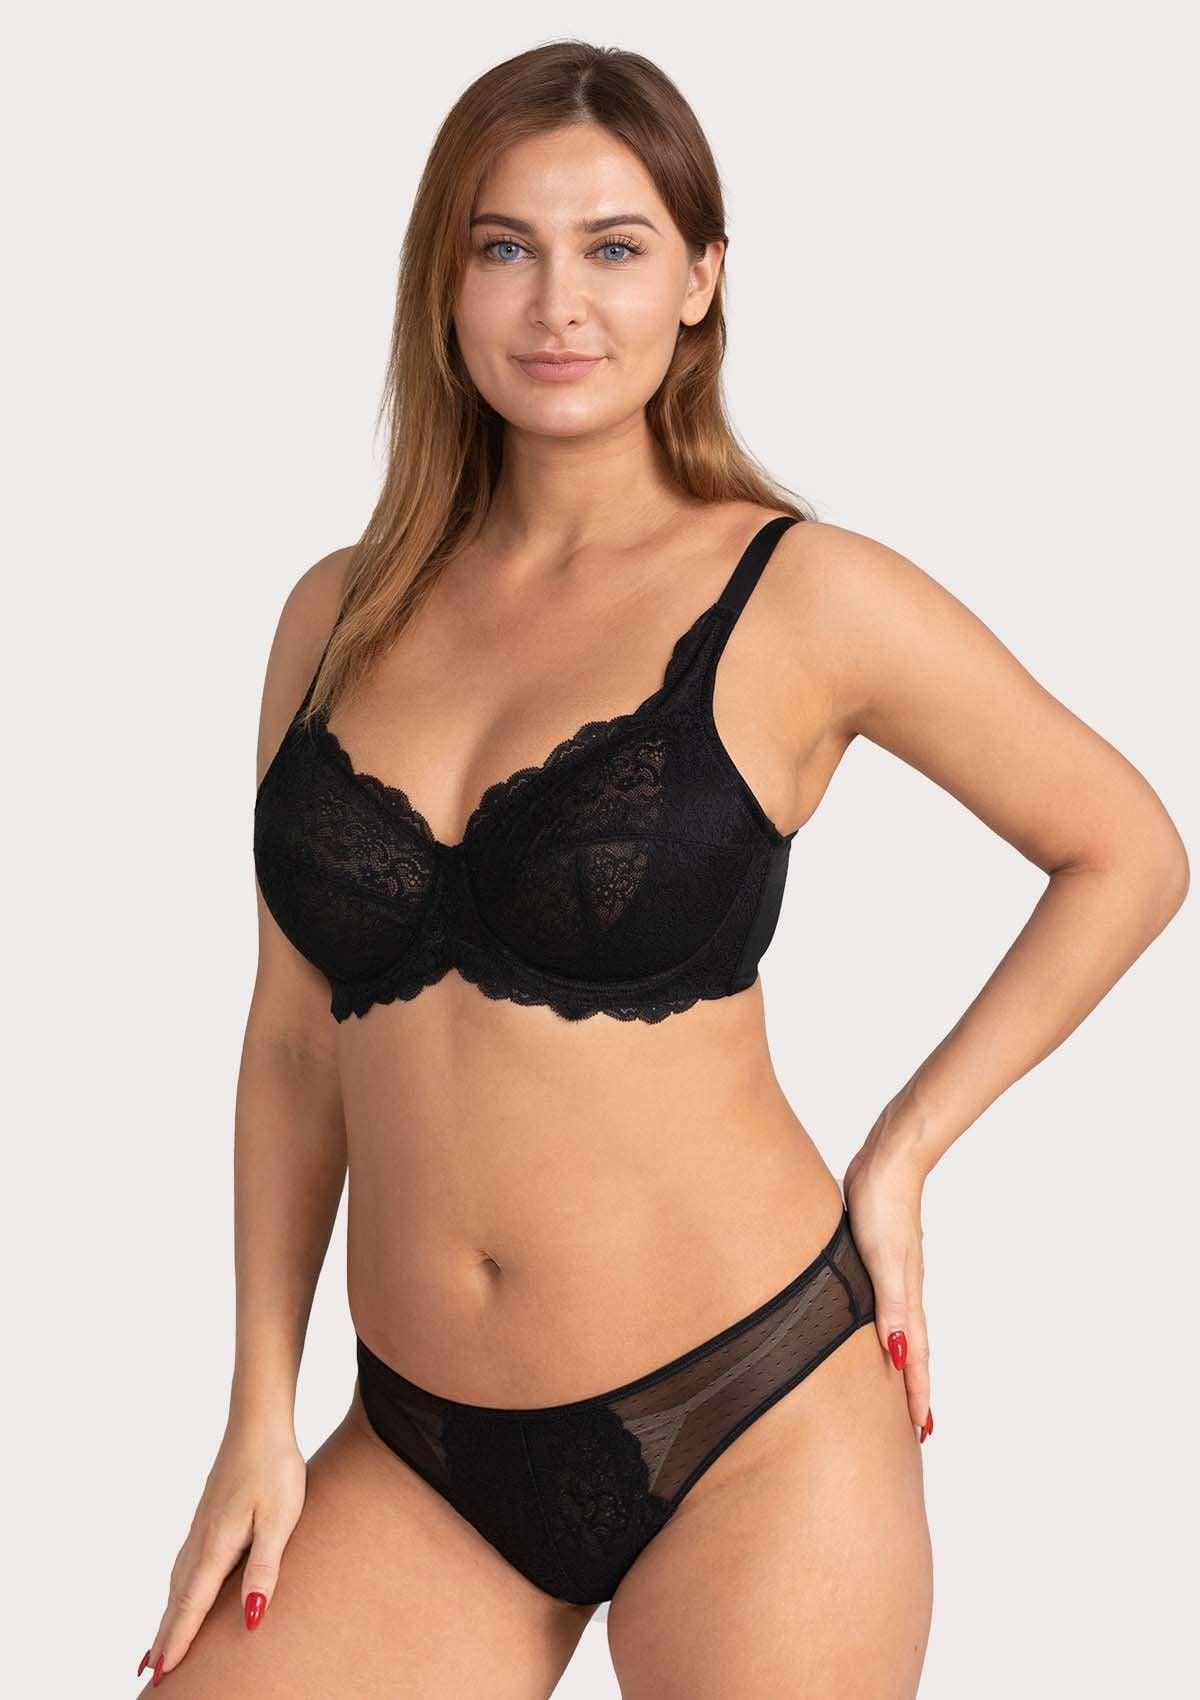 HSIA All-Over Floral Lace Unlined Bra: Minimizer Bra For Heavy Breasts - Black / 36 / C